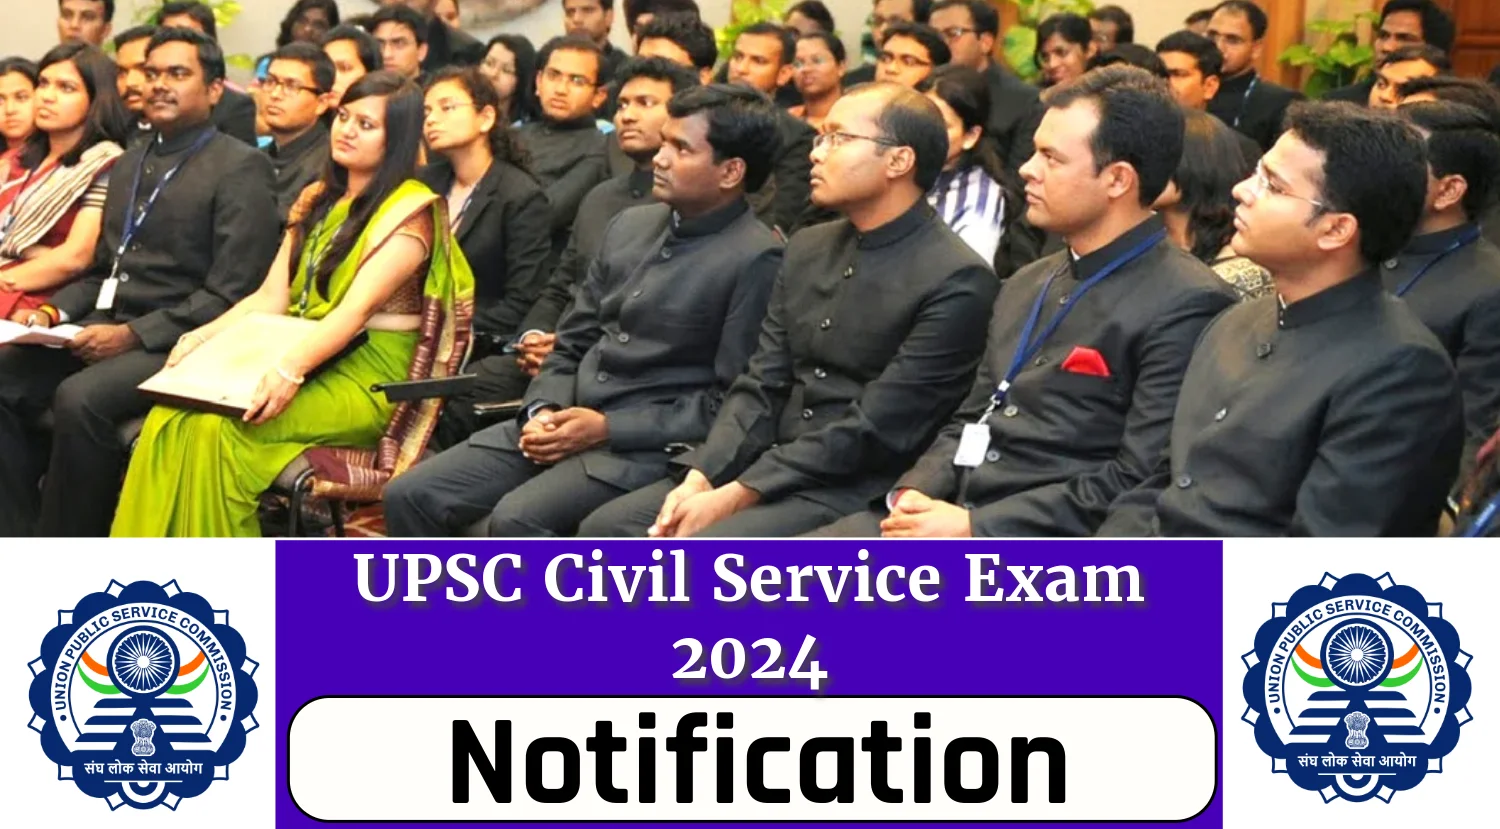 UPSC Civil Service Exam 2024 Notification Out, Check UPSC CSE Eligibility and Application Process Now